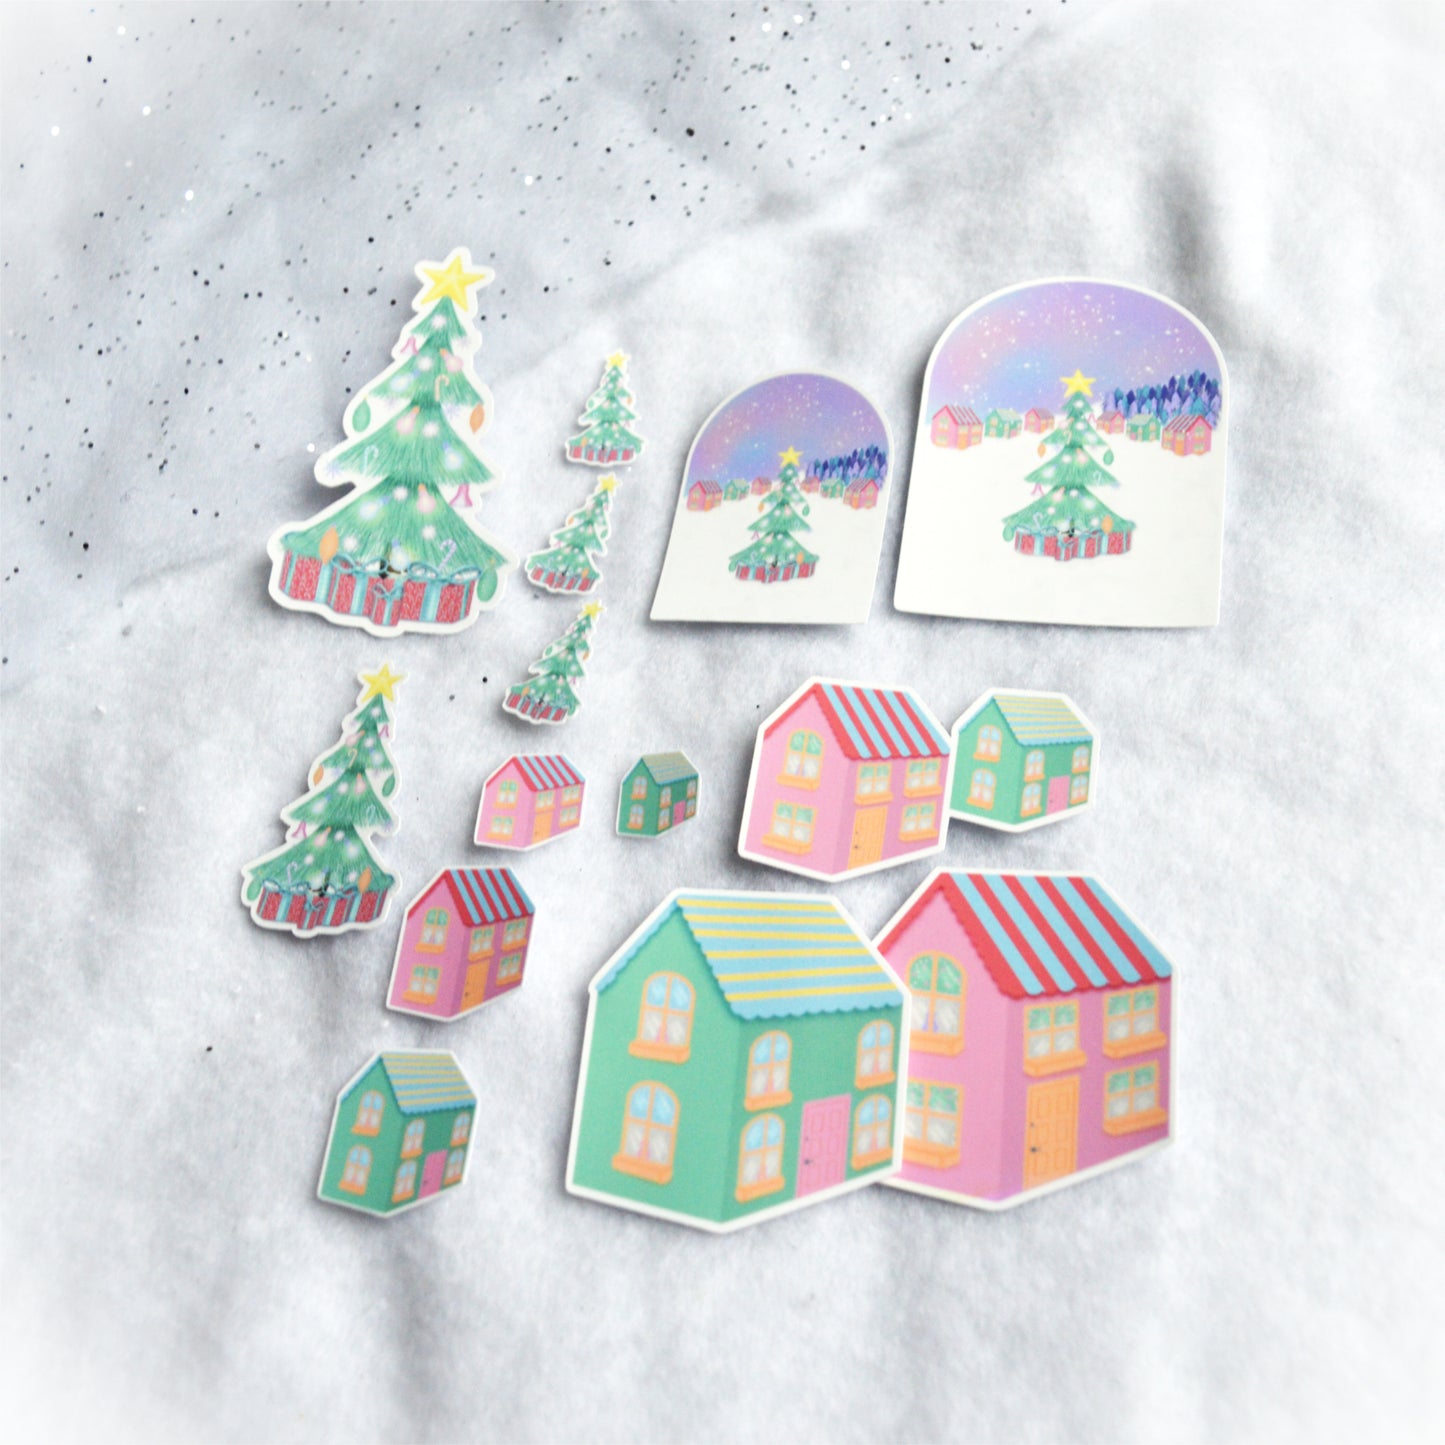 Christmas Collection - Winter Wonderland Vinyl Sticker Pack - 14 Die Cut Stickers - Perfect for Journals, Planners, Happy Mail, and More